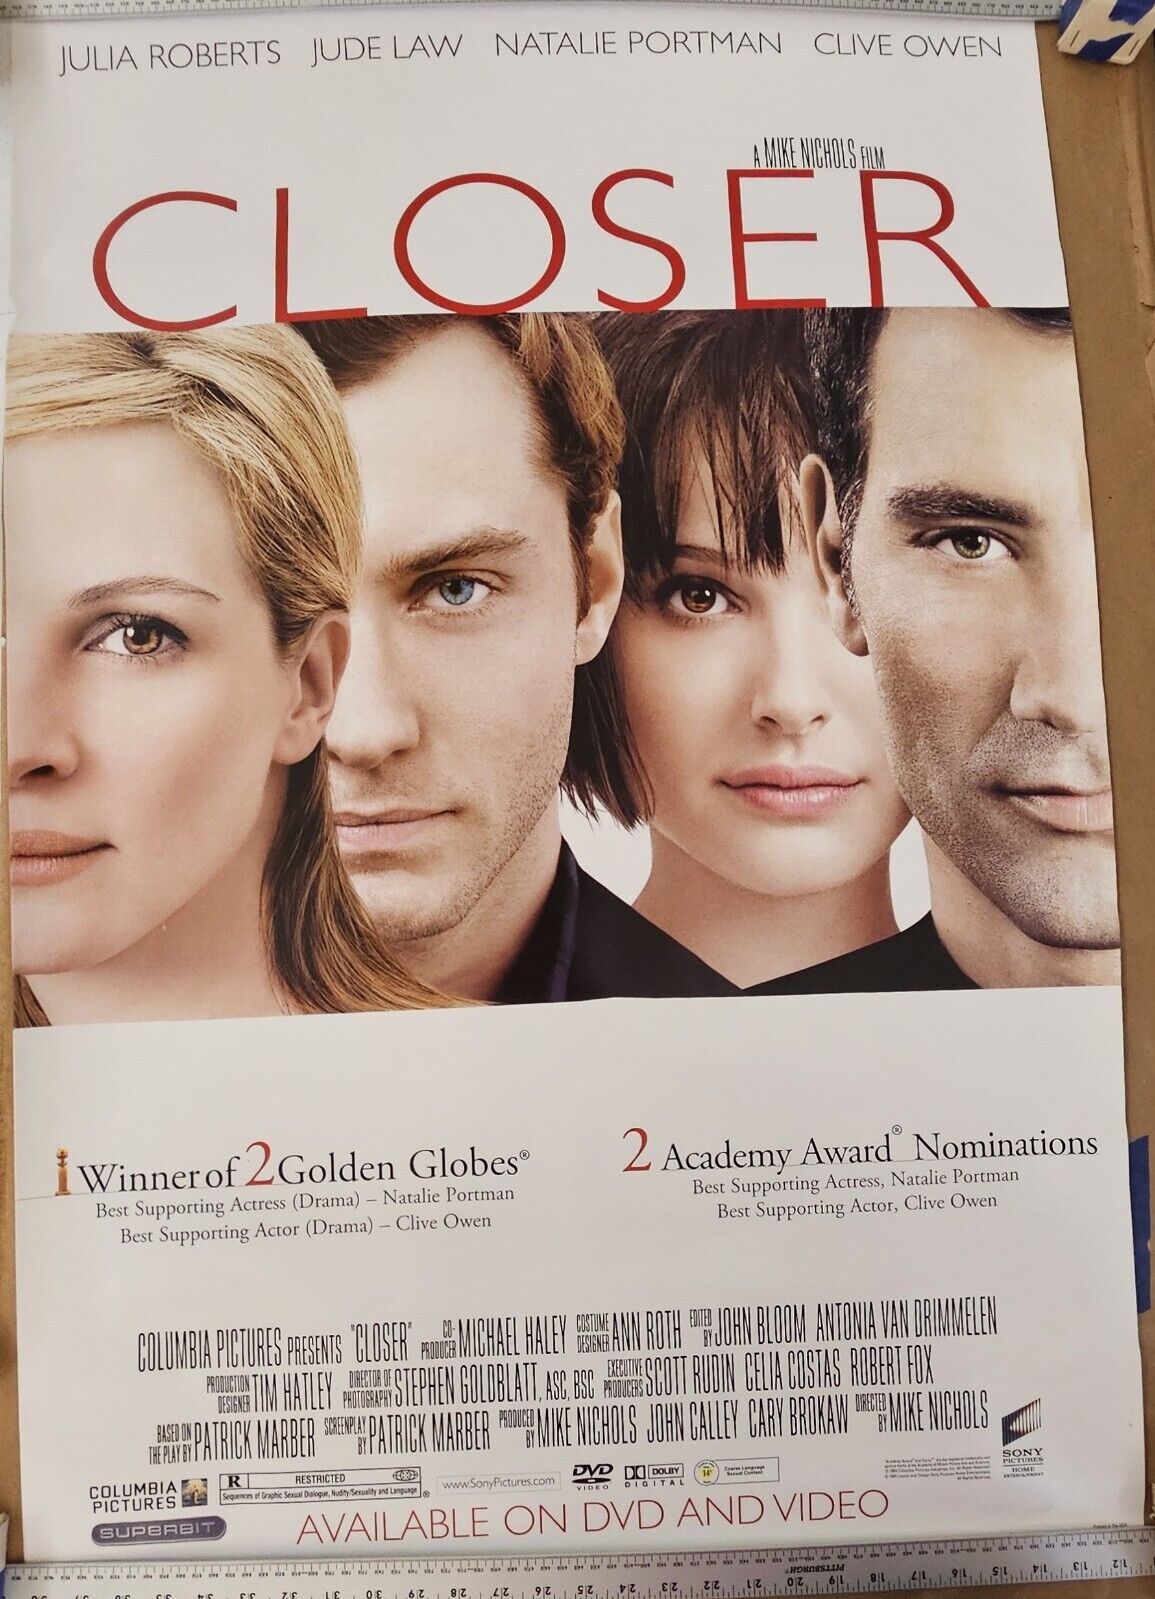 Julia Roberts And Jude  Law In Closer 27 x 40  DVD promotional Movie poster